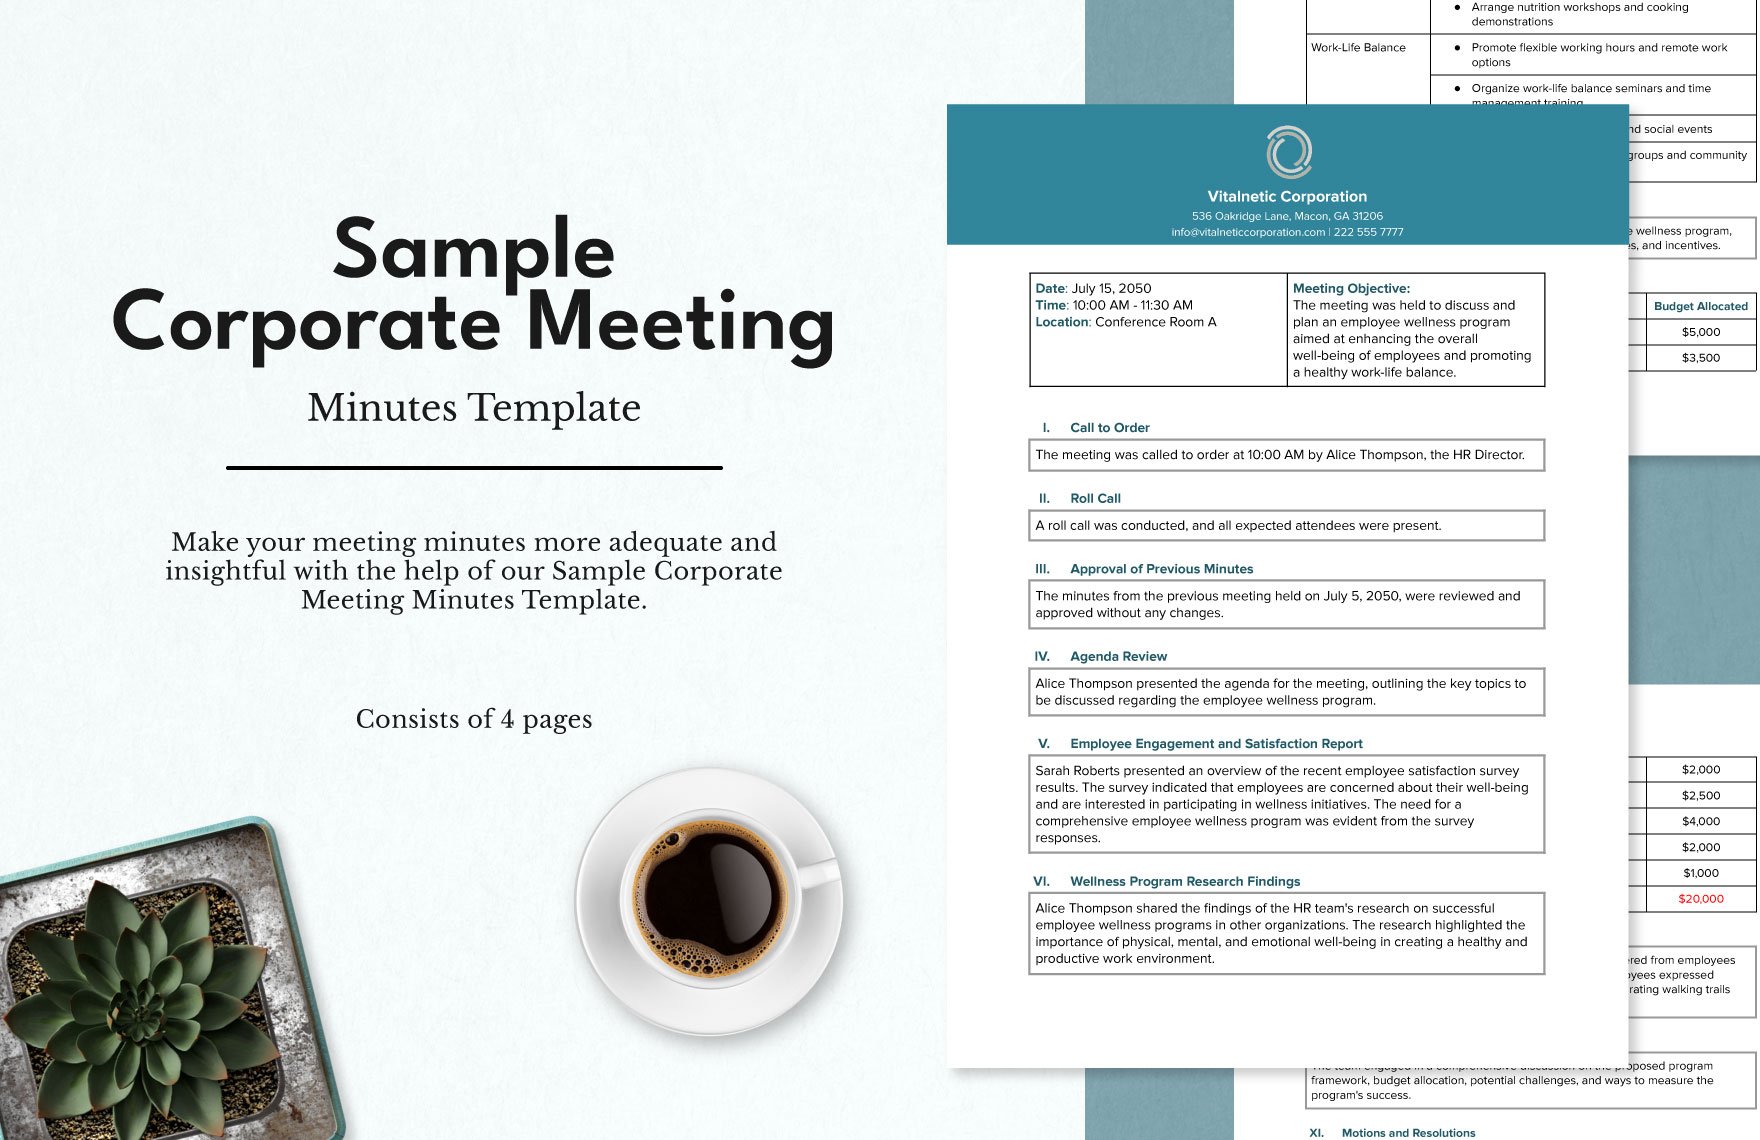 Sample Corporate Meeting Minutes Template